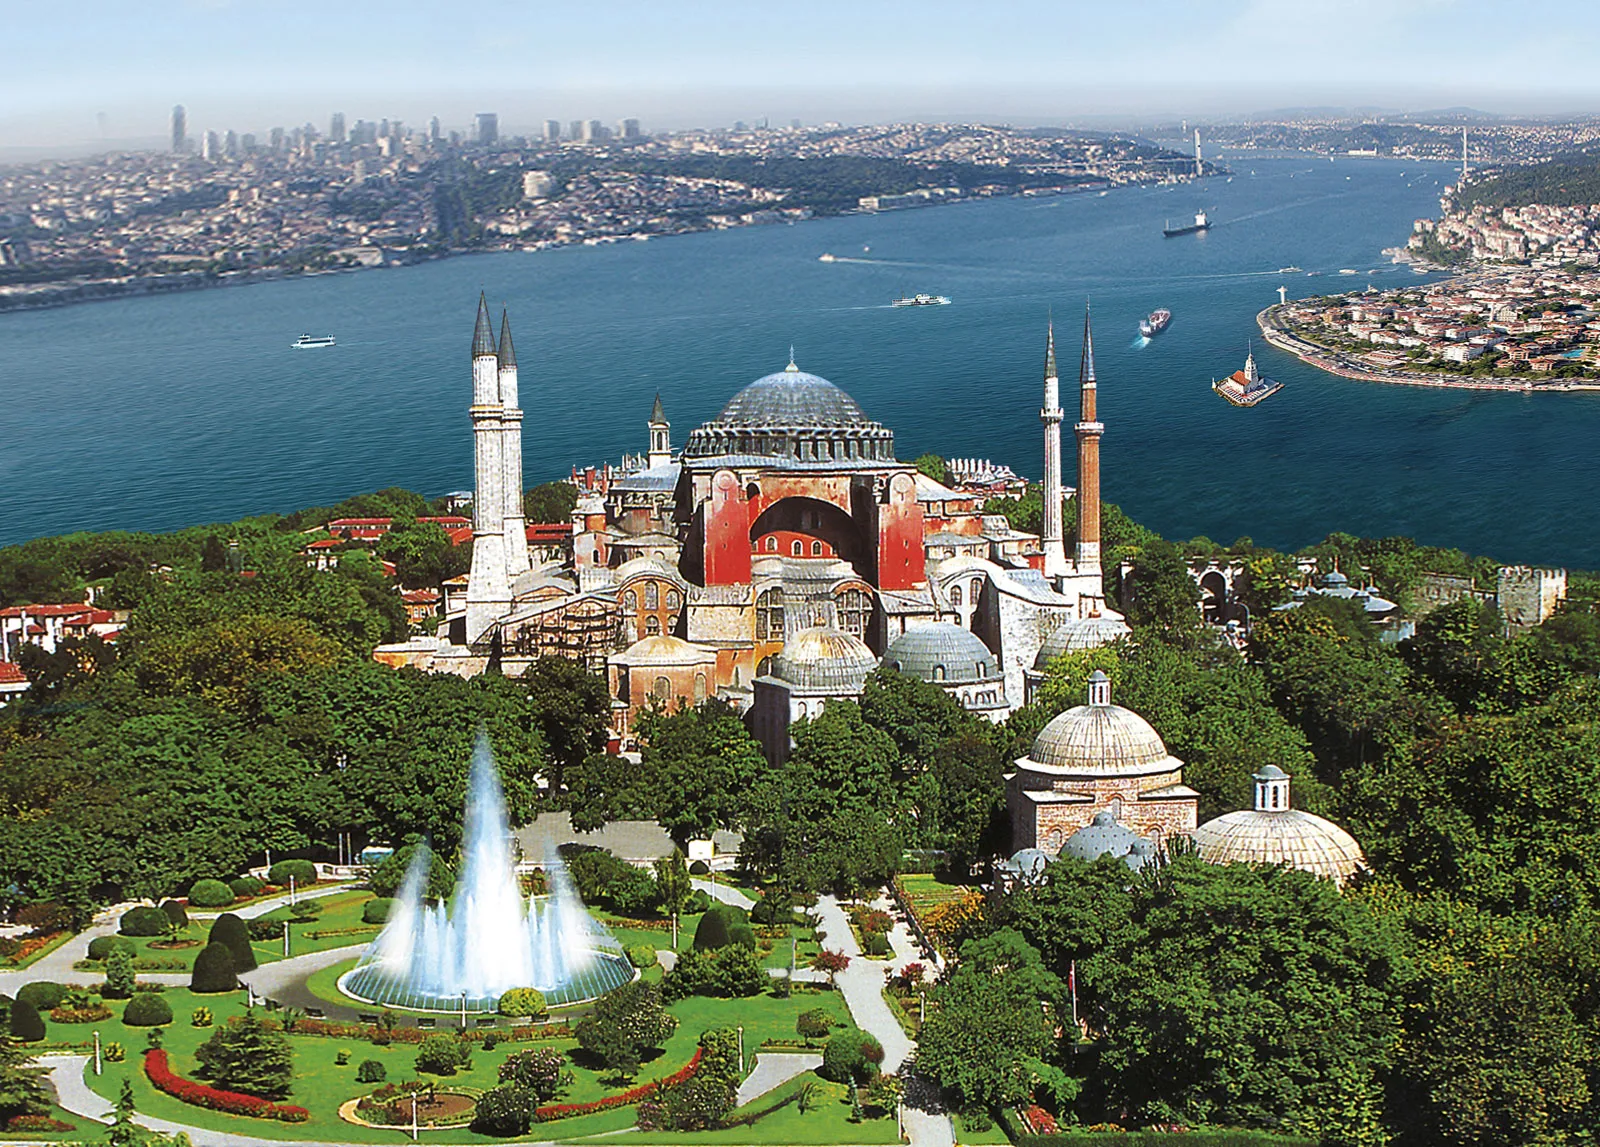 What is the largest covered market in Istanbul, offering a wide range of goods and vibrant shopping experience?